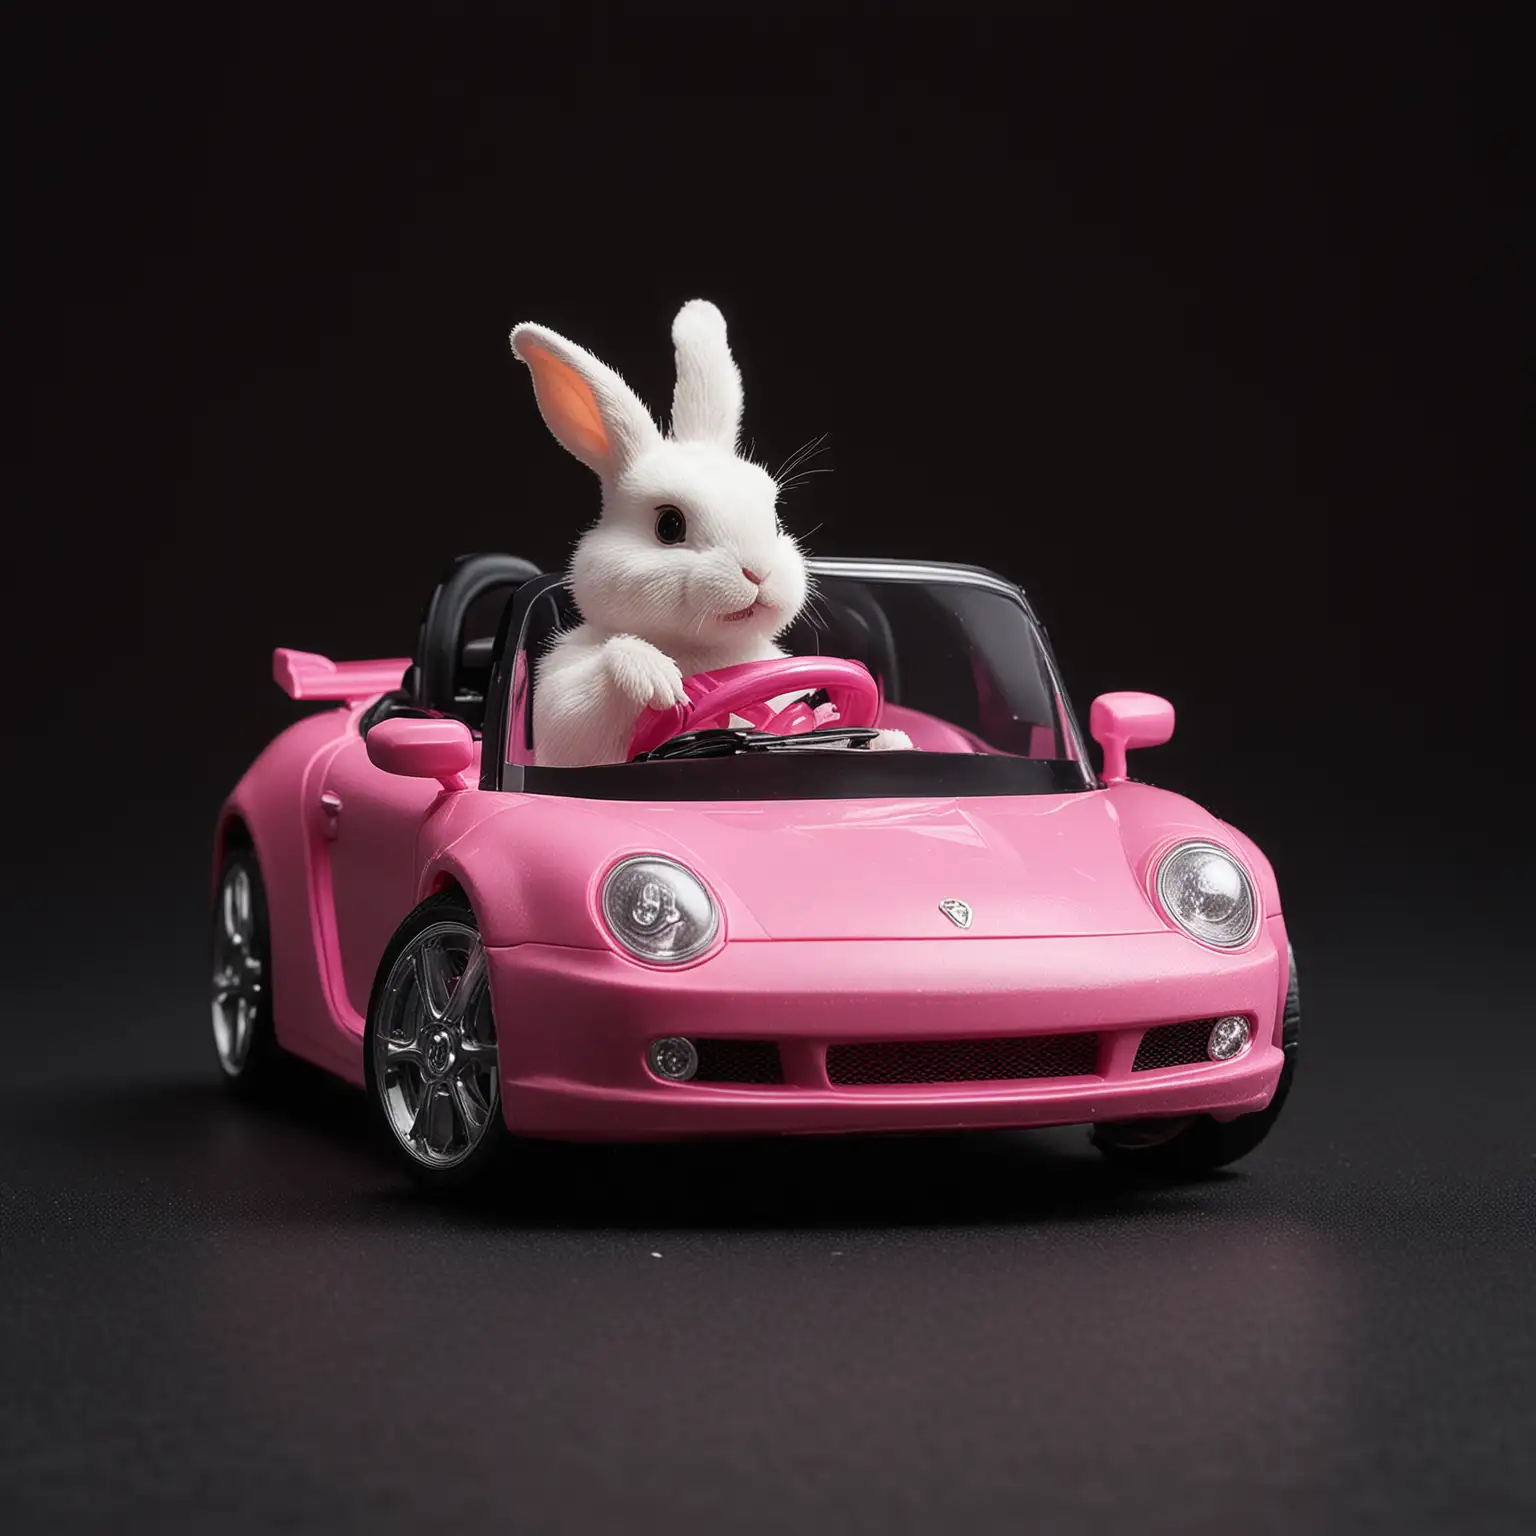 Adorable Realistic Rabbit Driving Pink Toy Car